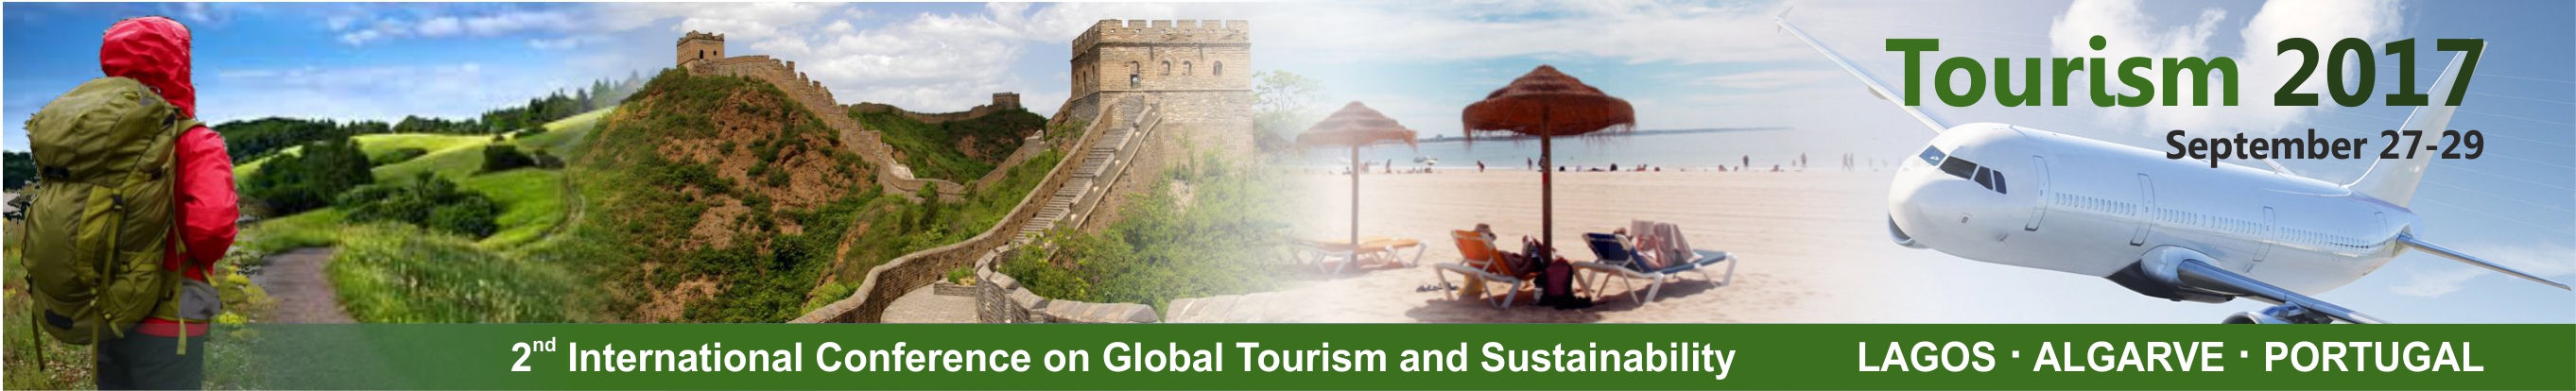 TOURISM 2017 - 2nd International Conference on Global Tourism and Sustainability invites all researchers, academics and practitioners in the field of tourism and sustainability to contribute to this discussion by presenting their work and research at this scientific and cultural event.